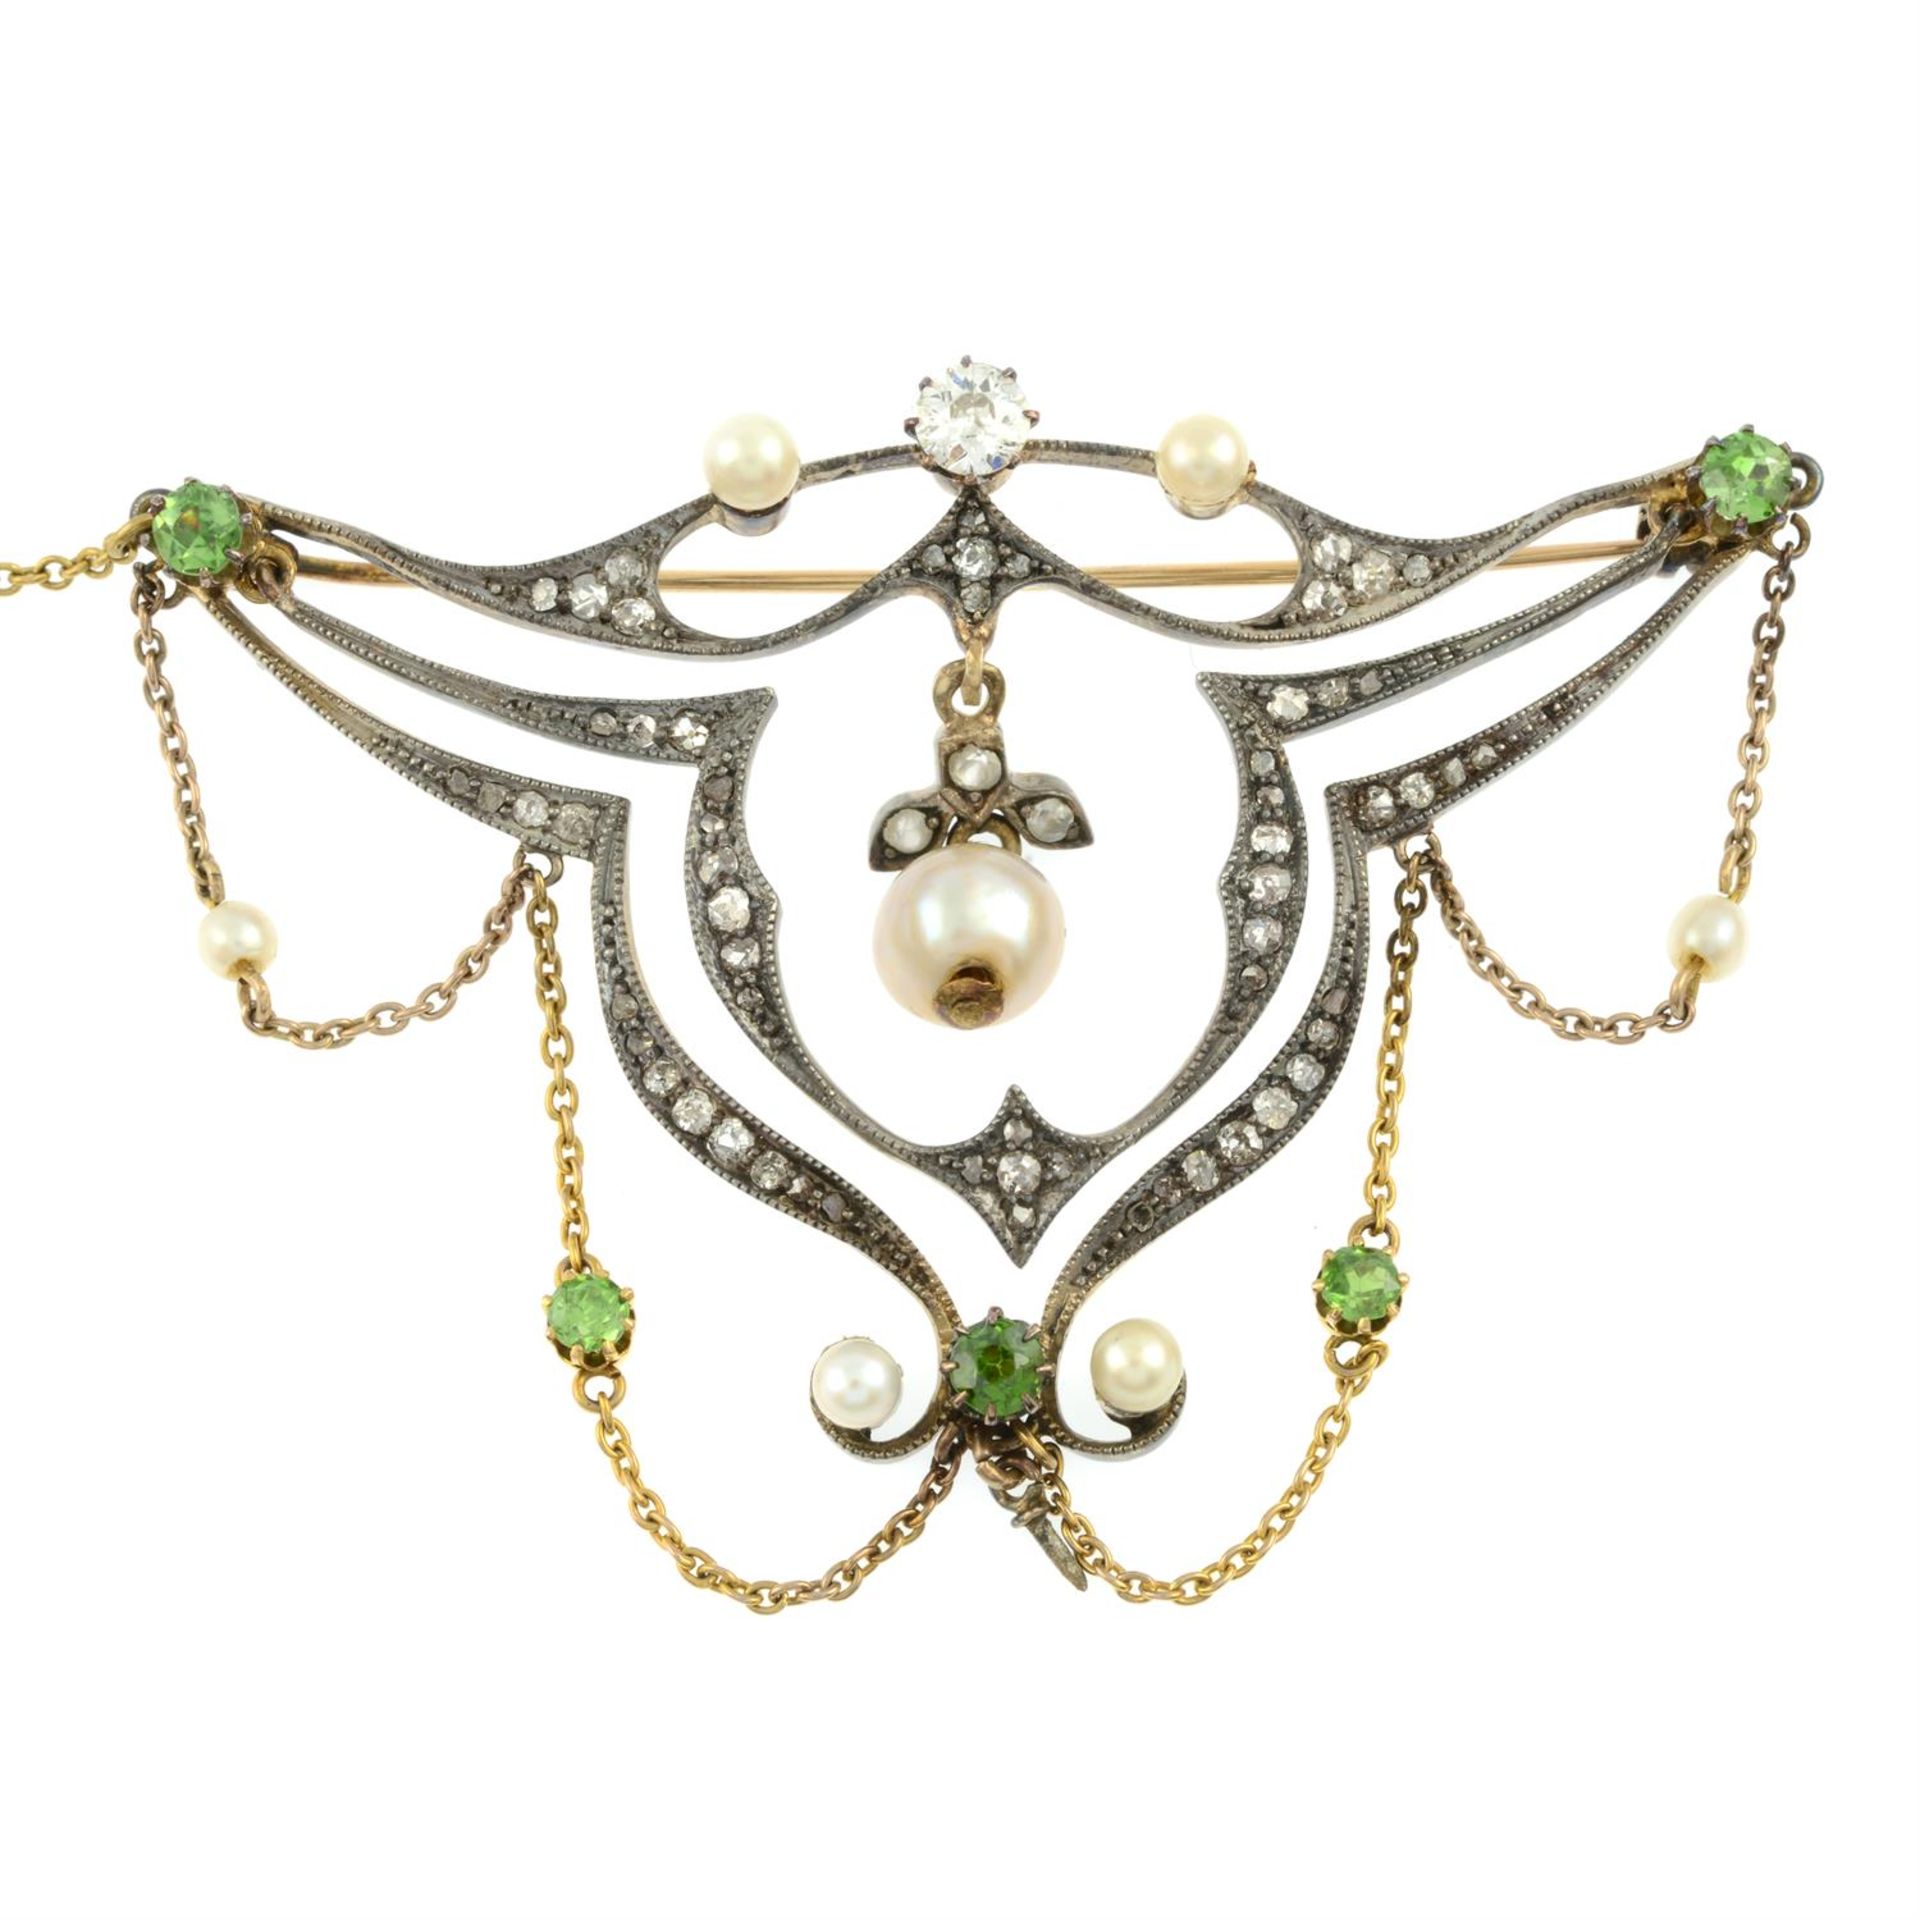 A late 19th century silver and gold, vari-cut diamond, demantoid garnet and pearl brooch. - Image 2 of 4